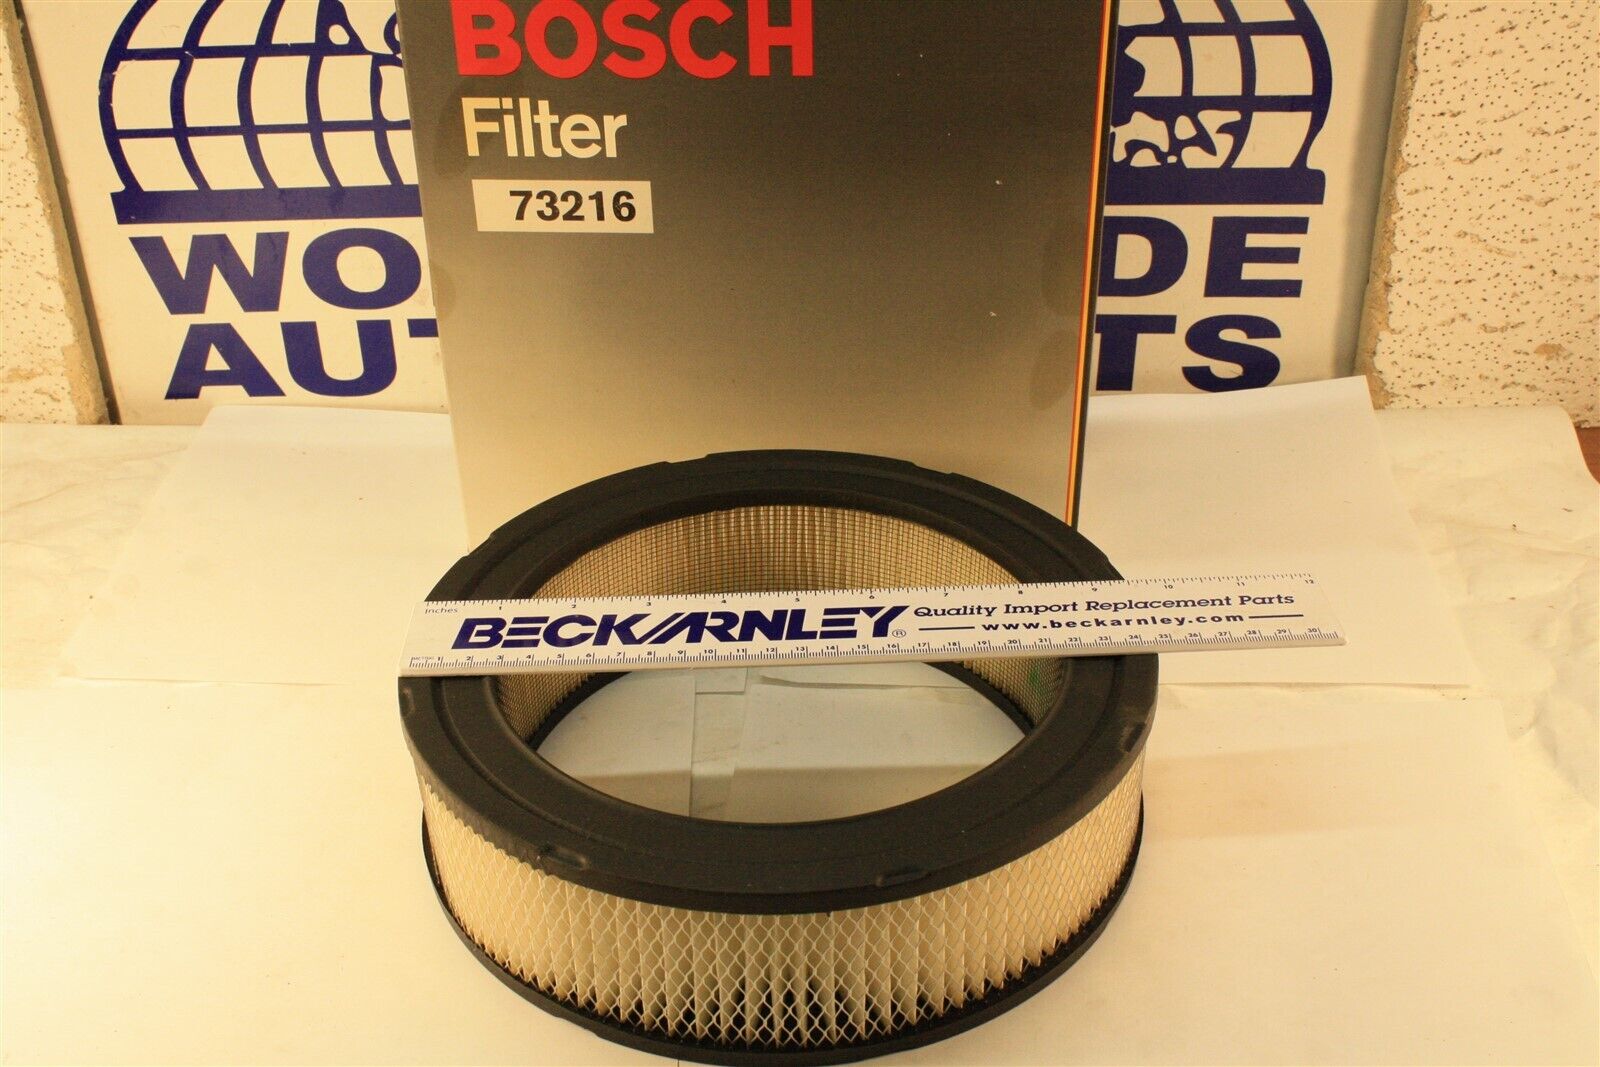 Air Filter AF137 Bosch 73216 for MAZDA RX2 RX3 RX4 RX7 Cosmo RX-Pickup 1971-85